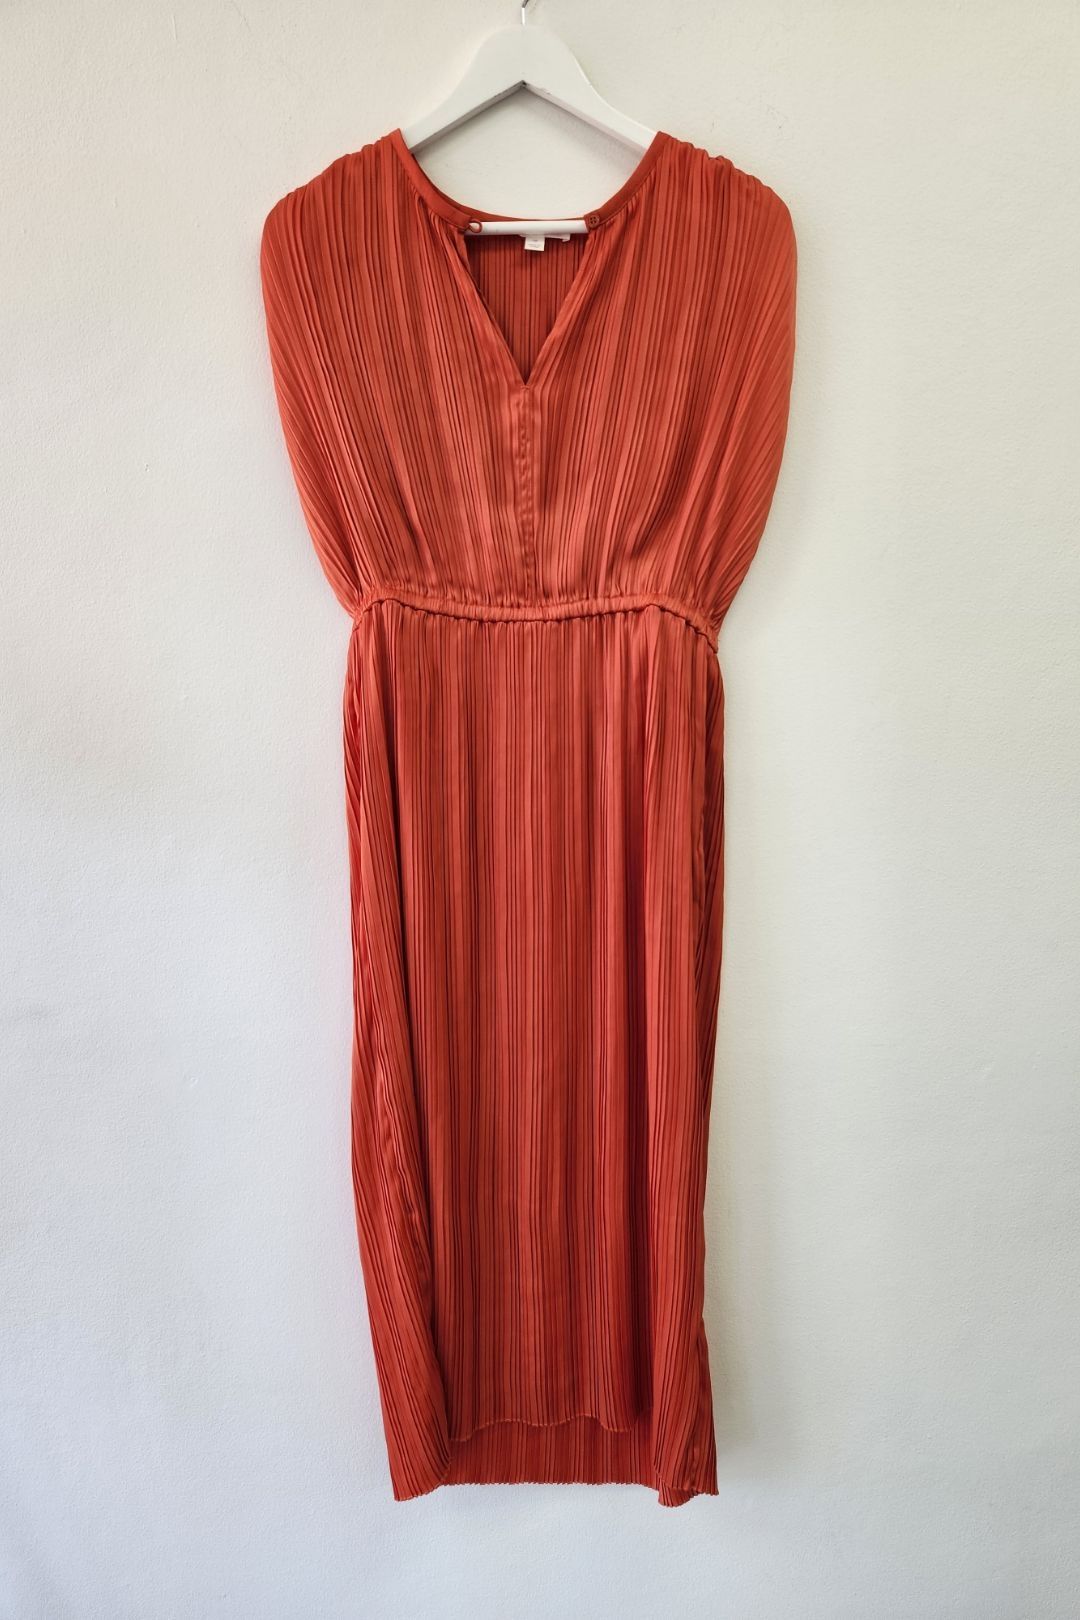 Trenery - Pleated Red Shift Dress